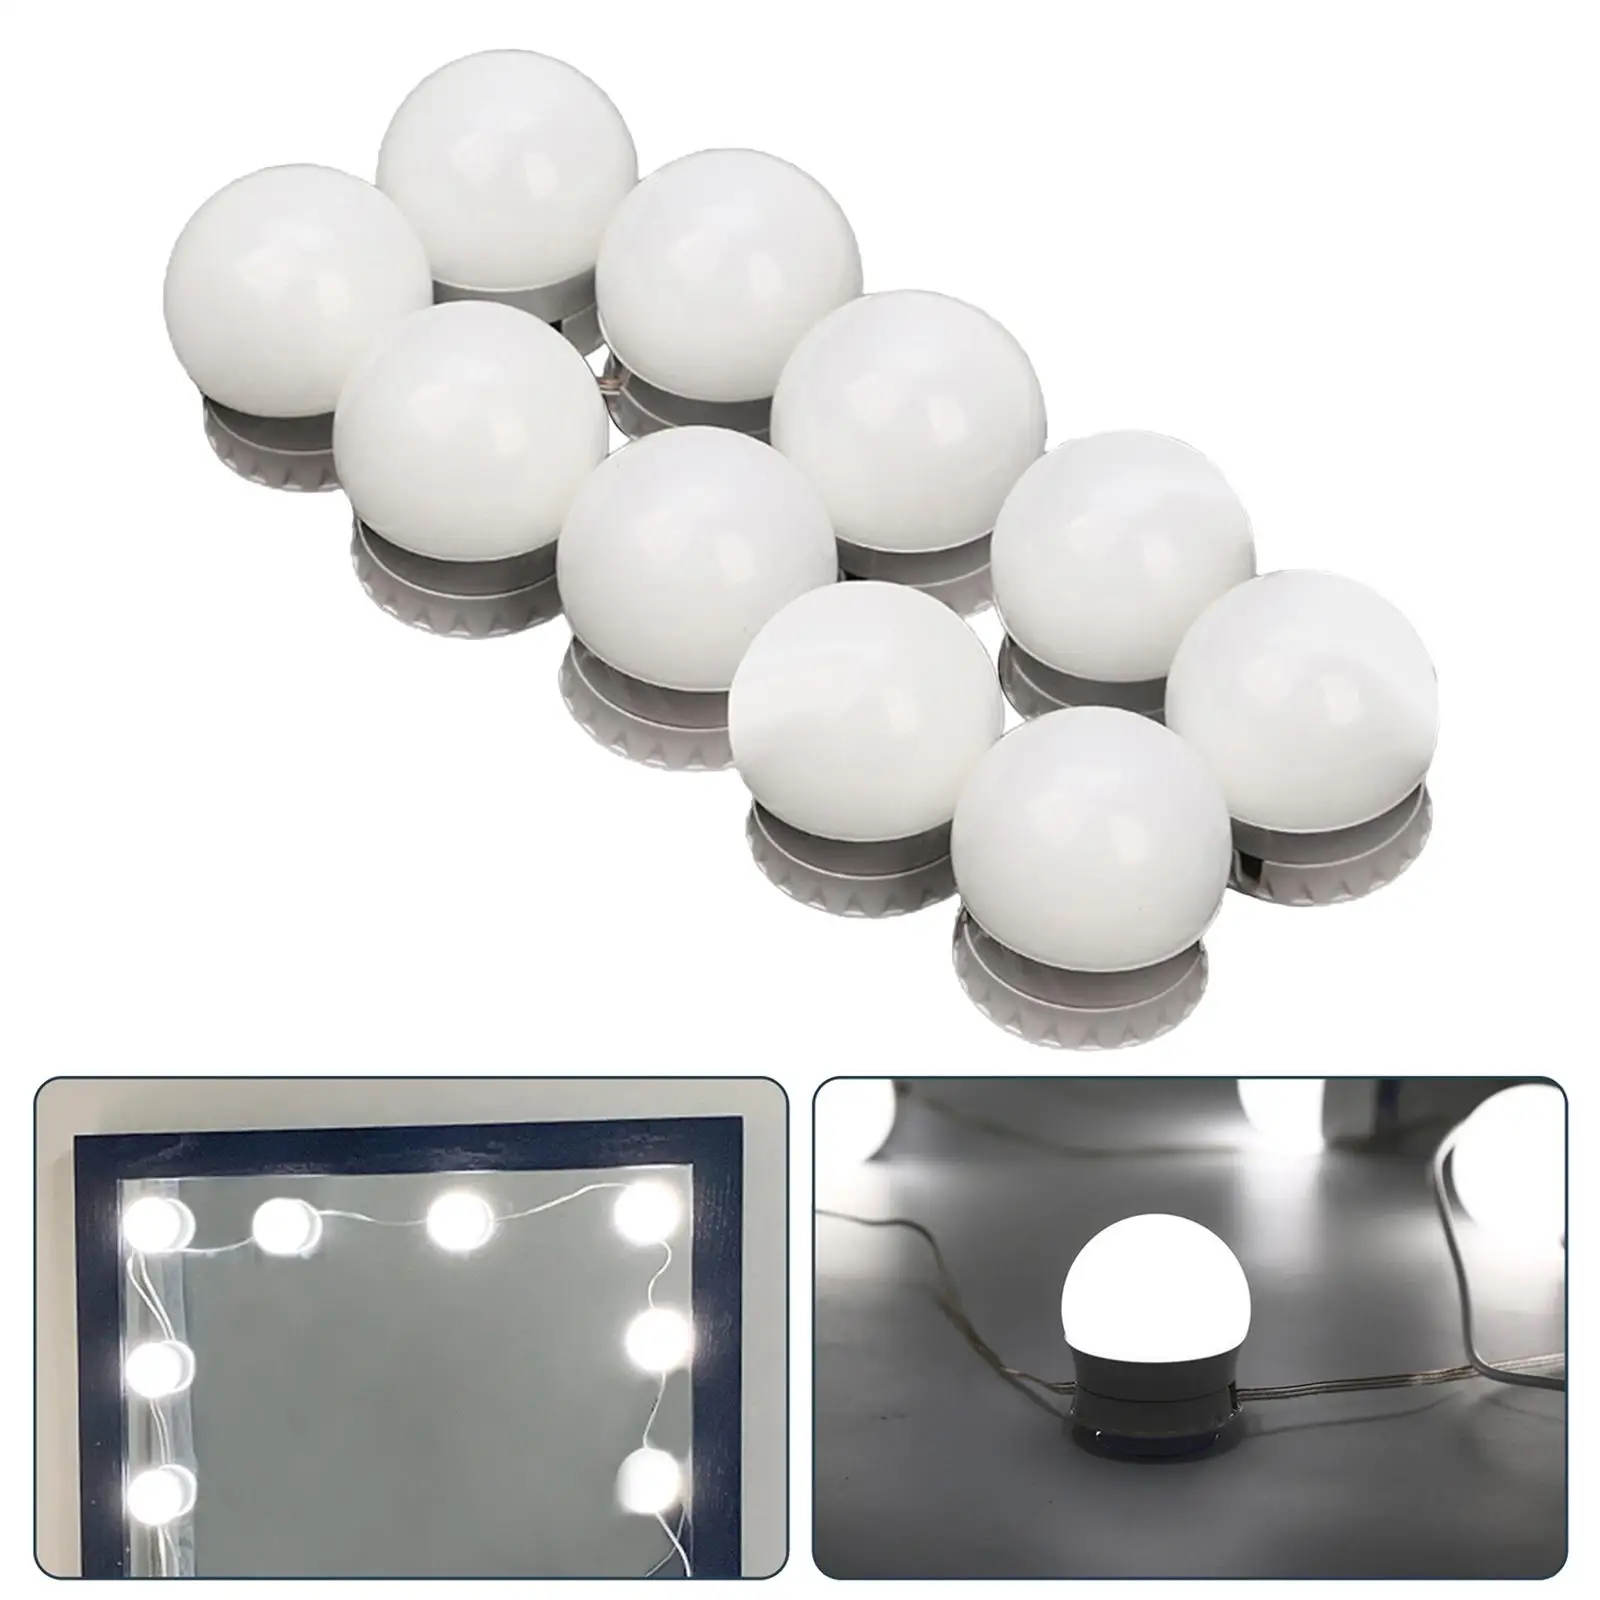 10 LED Bulbs Stepless Dimming (Cold/Neutral/Warm)Makeup Mirror Light Headlight Suction Cup Installation Vanity Light Girls Gift